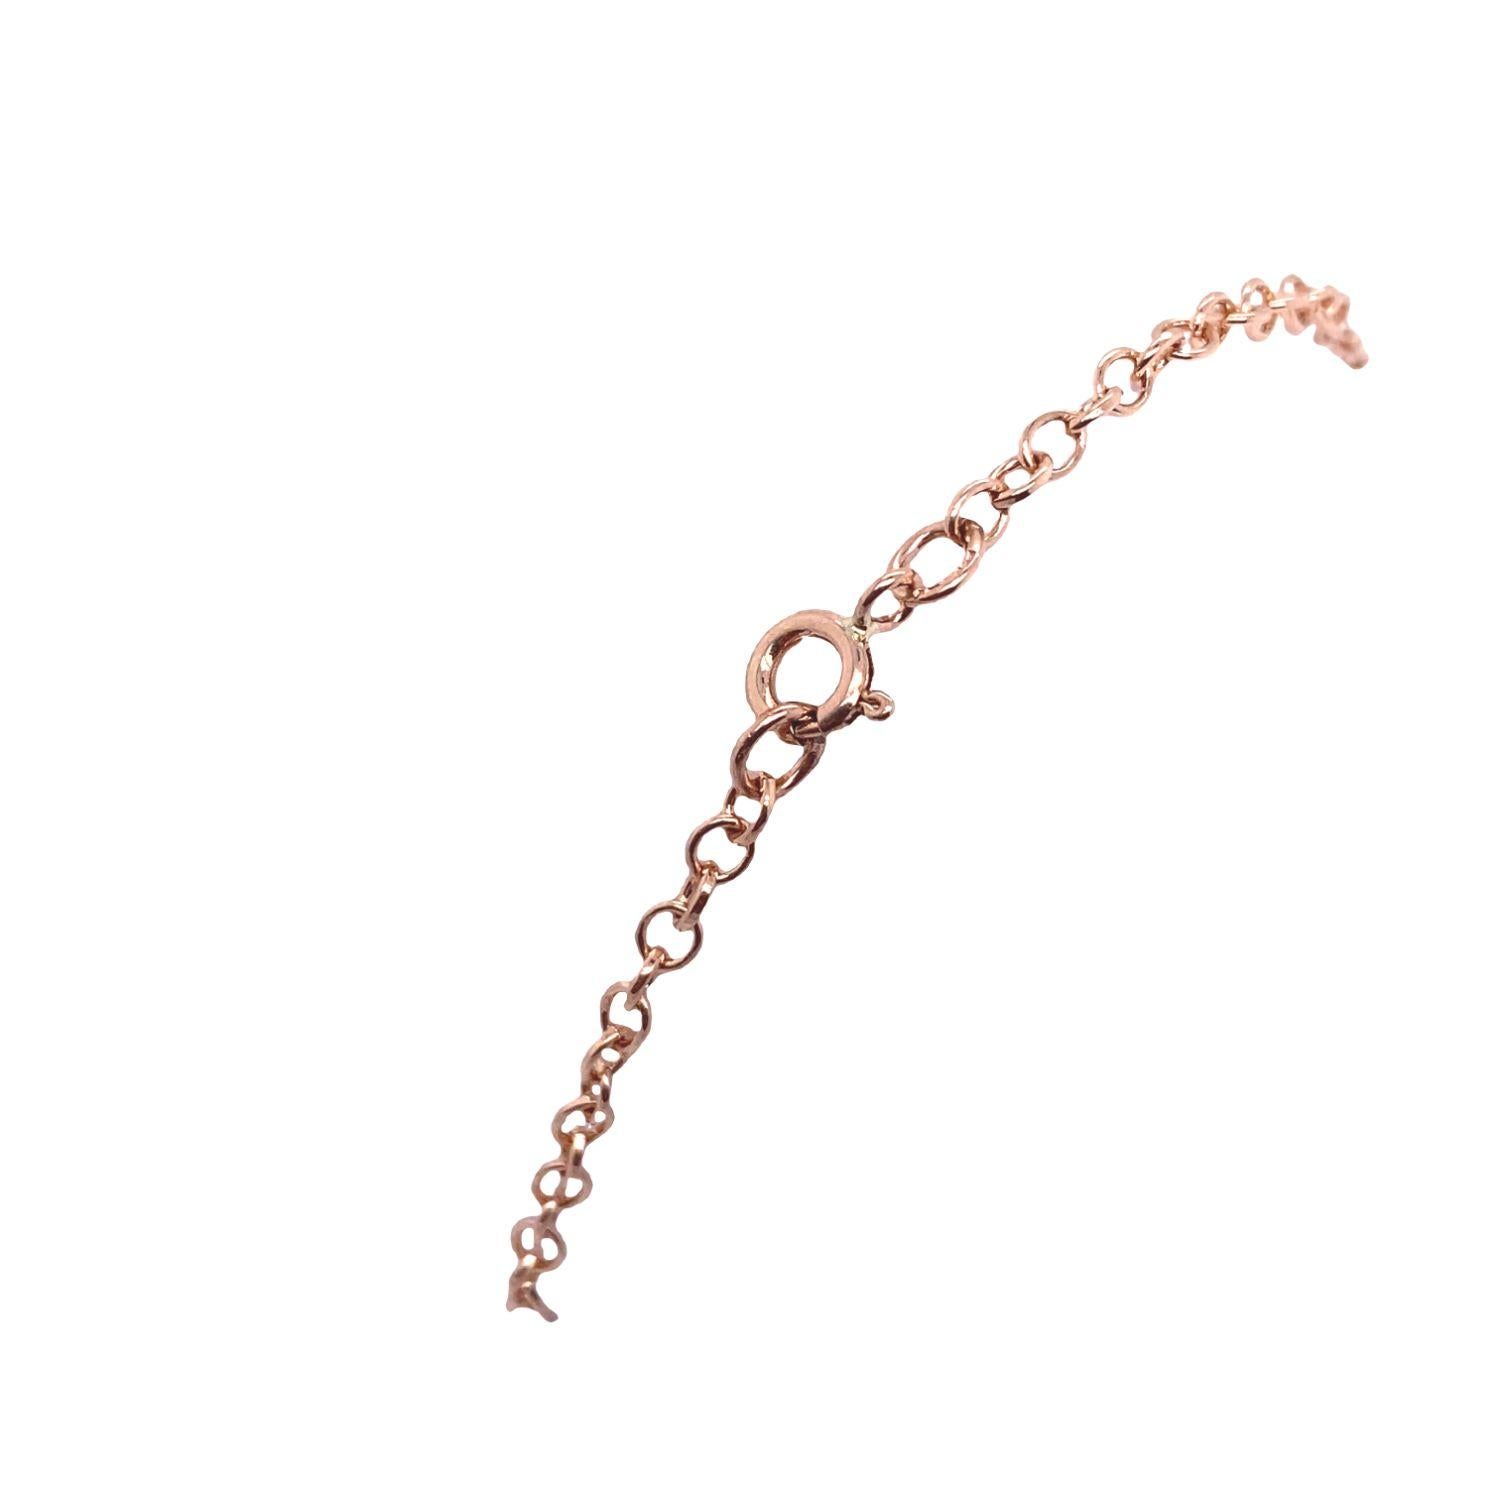 9ct Rose Gold Single Diamond Bracelet, Set With a 0.25ct H/SI1 Round Diamond

9ct Rose Gold Single Diamond Bracelet, Set With 0.25ct H/SI1 Round Brilliant Cut Natural Diamond Suspended From The Centre Of the Bracelet.

Additional Information:
Total